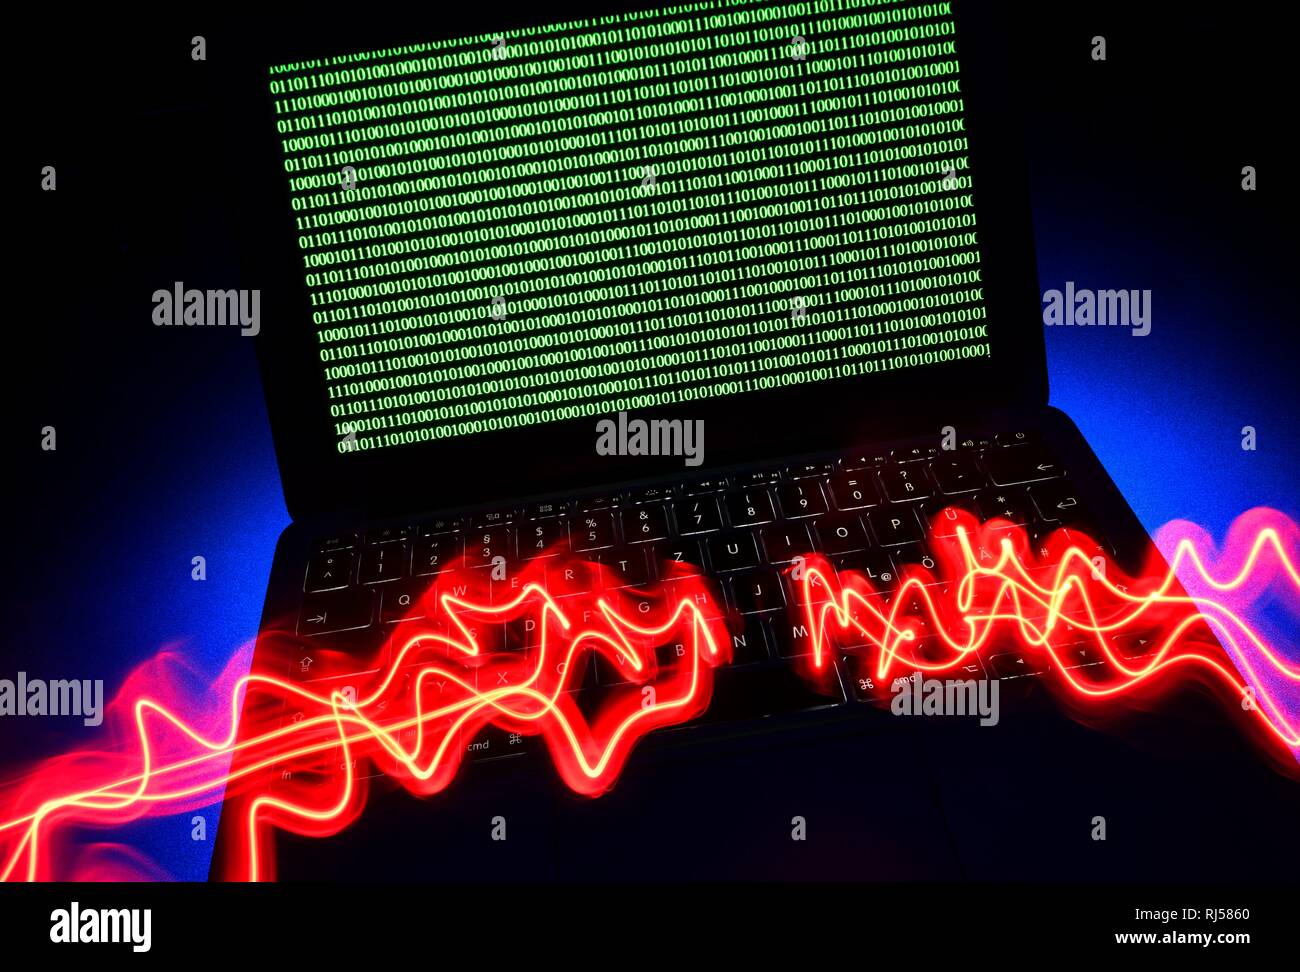 Laptop, symbolic image, cybercrime, computer crime, computer hacker, data security, Germany Stock Photo